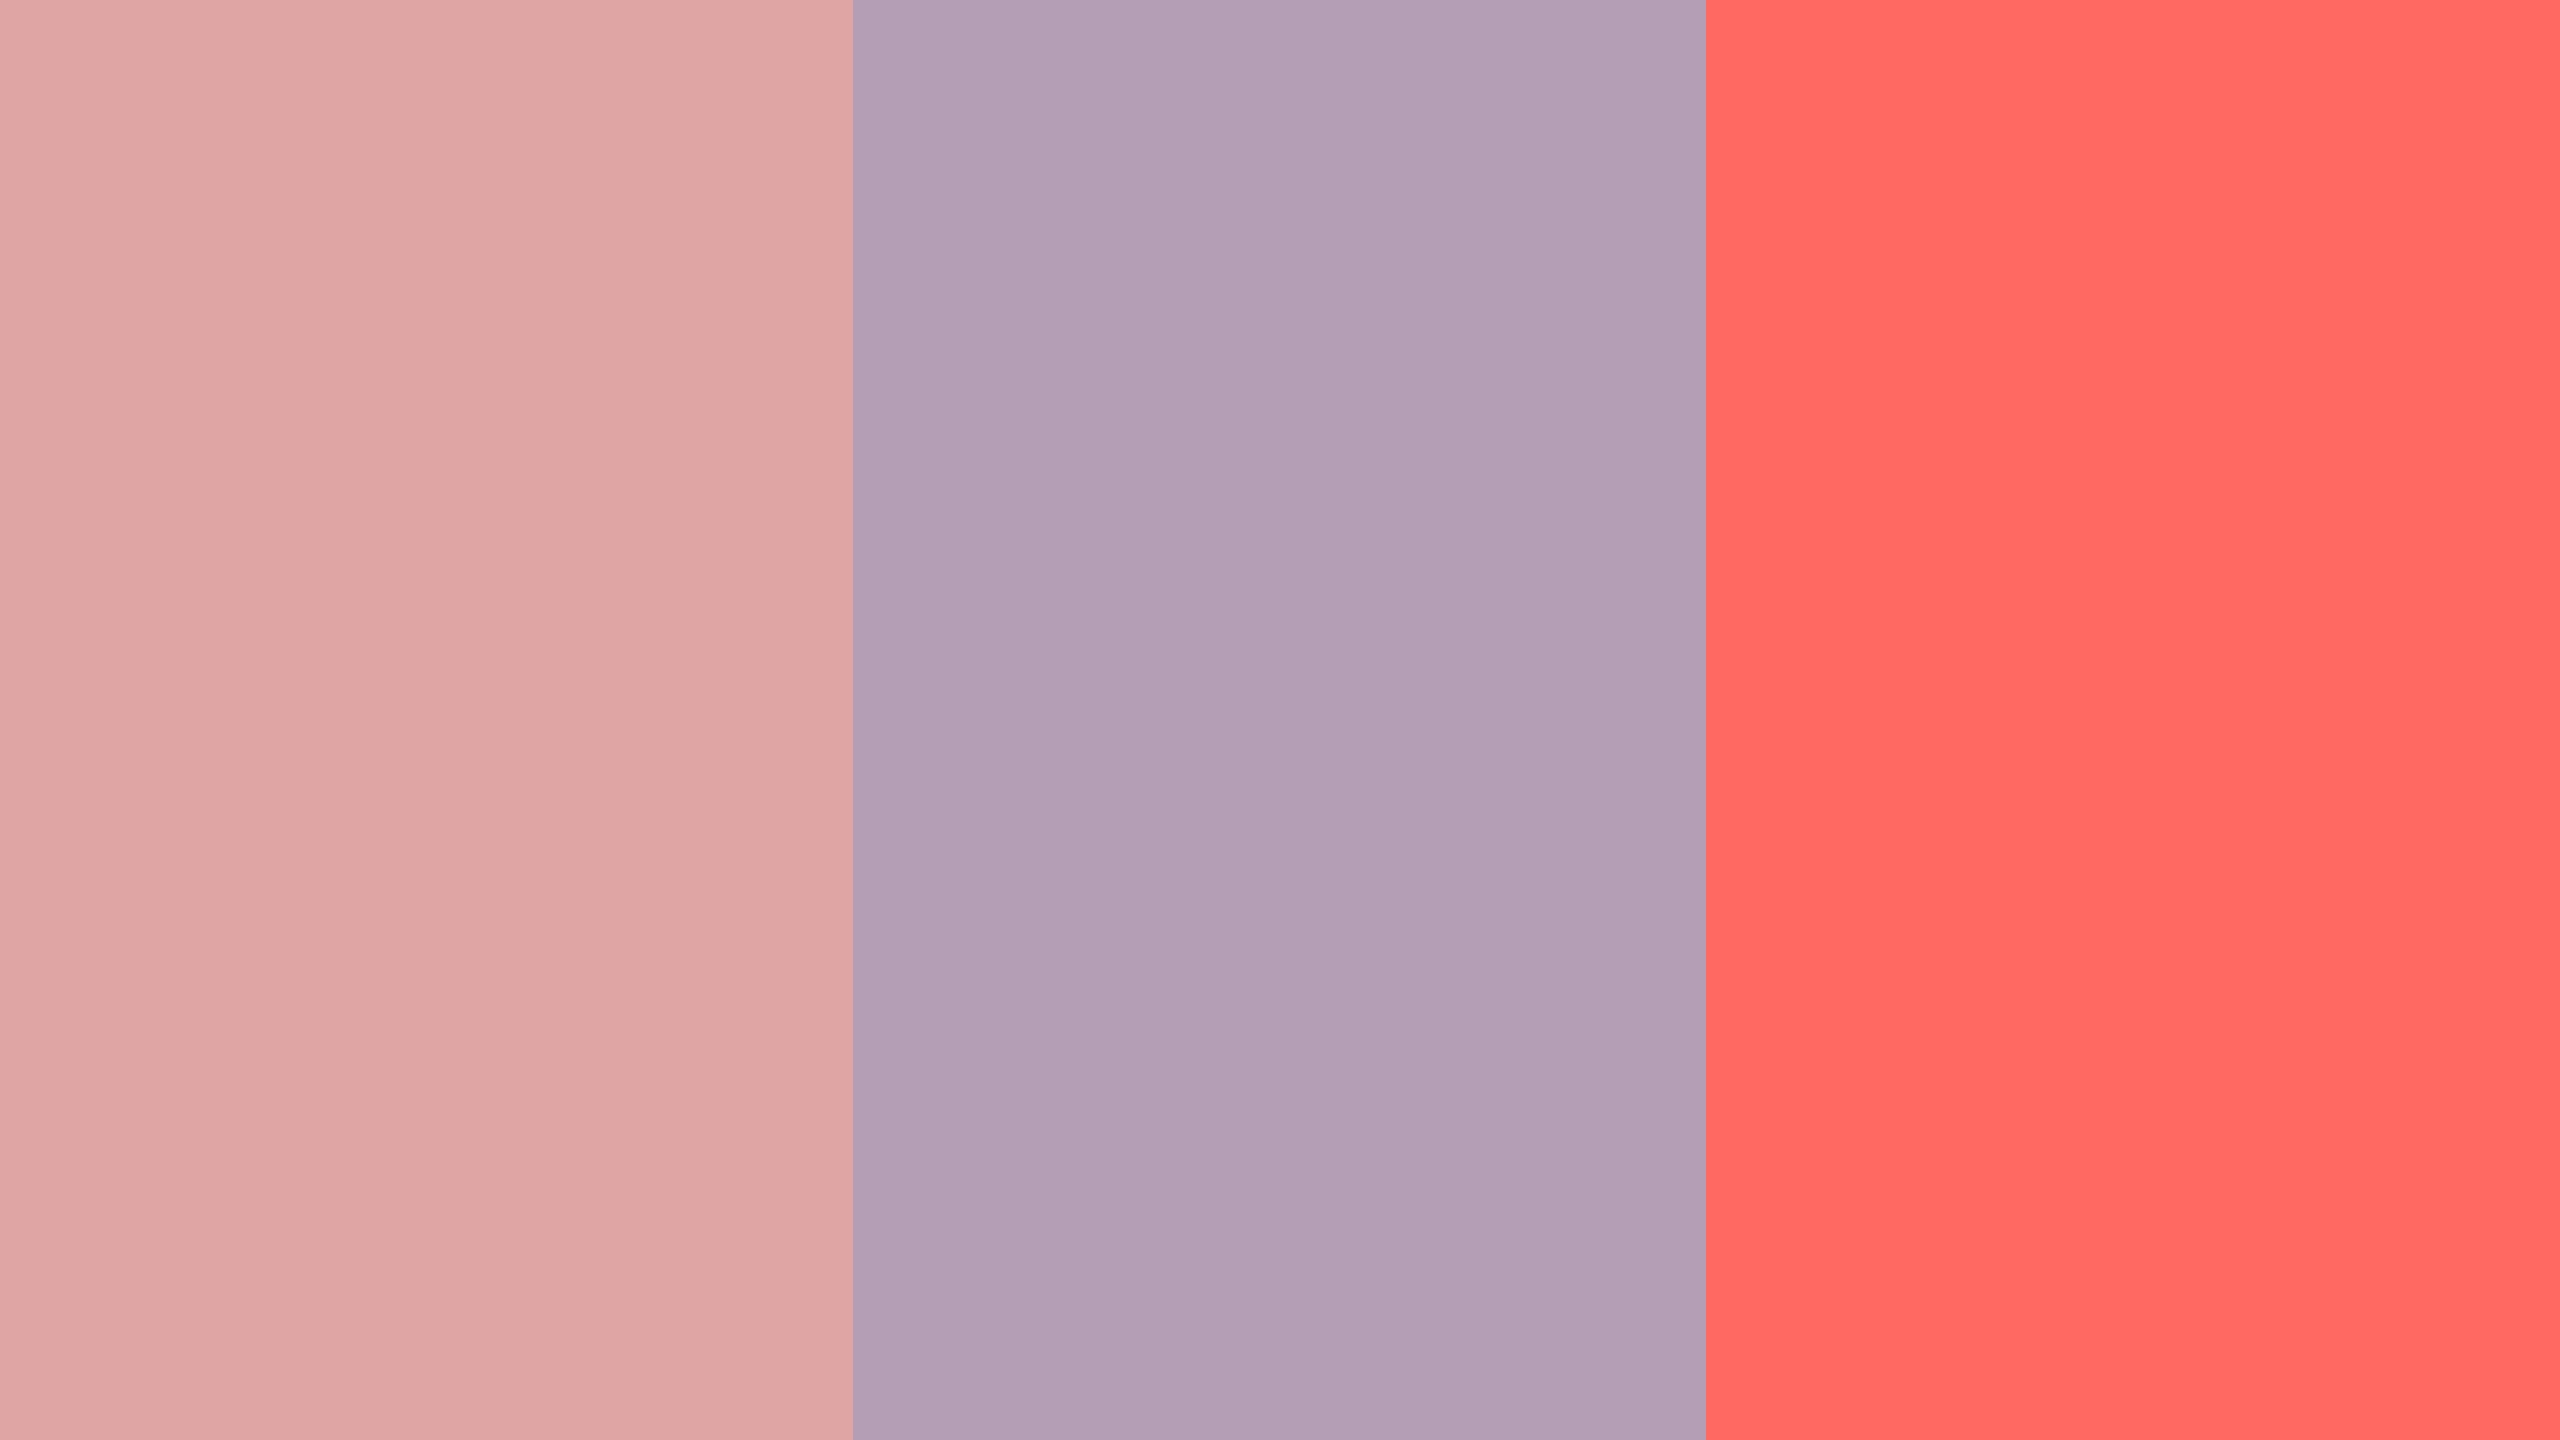 Pastel Pink Pastel Purple and Pastel Red solid three color background